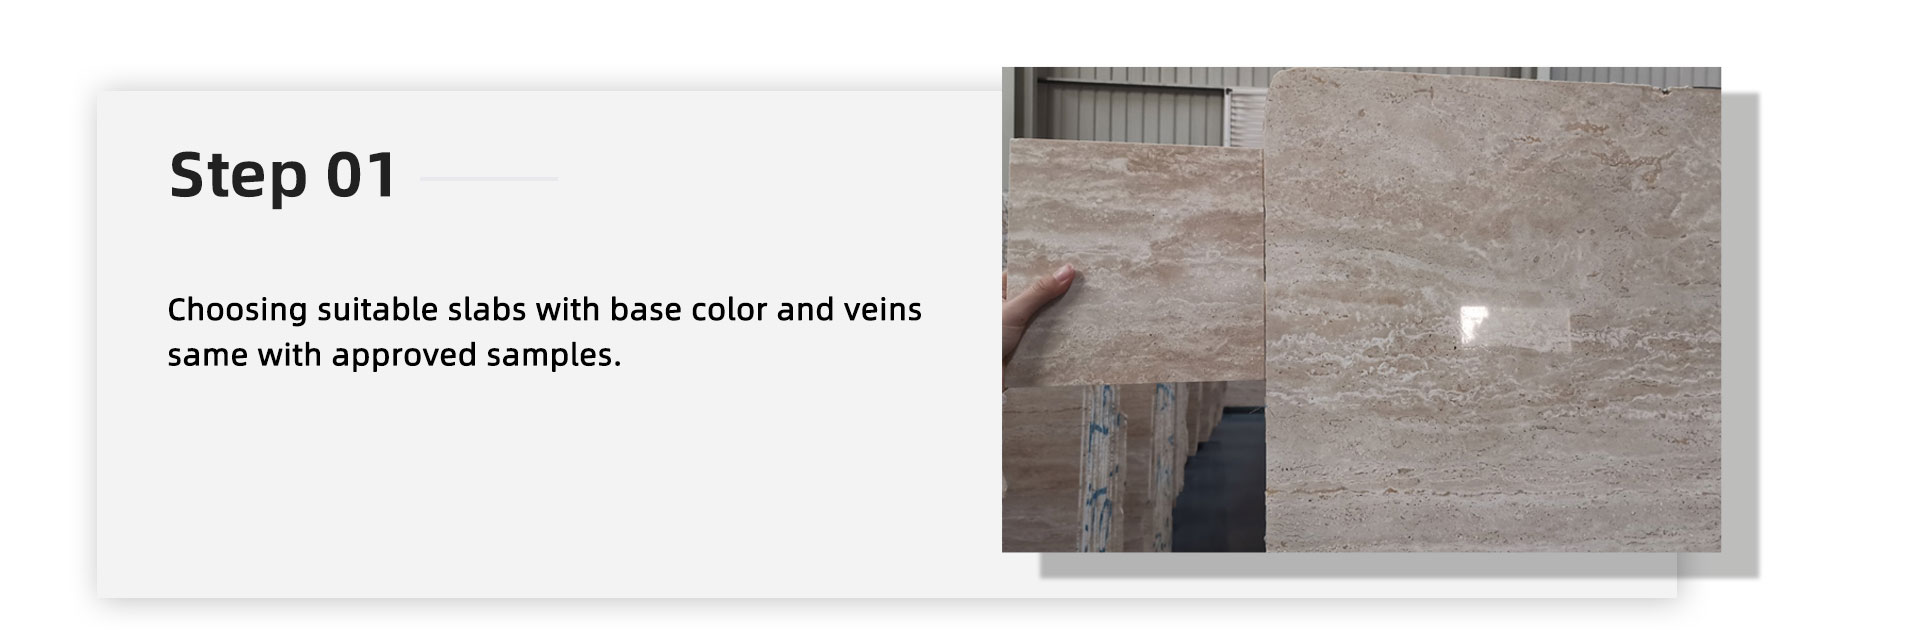 Choosing suitable slabs with base color and veins same with approved samples.